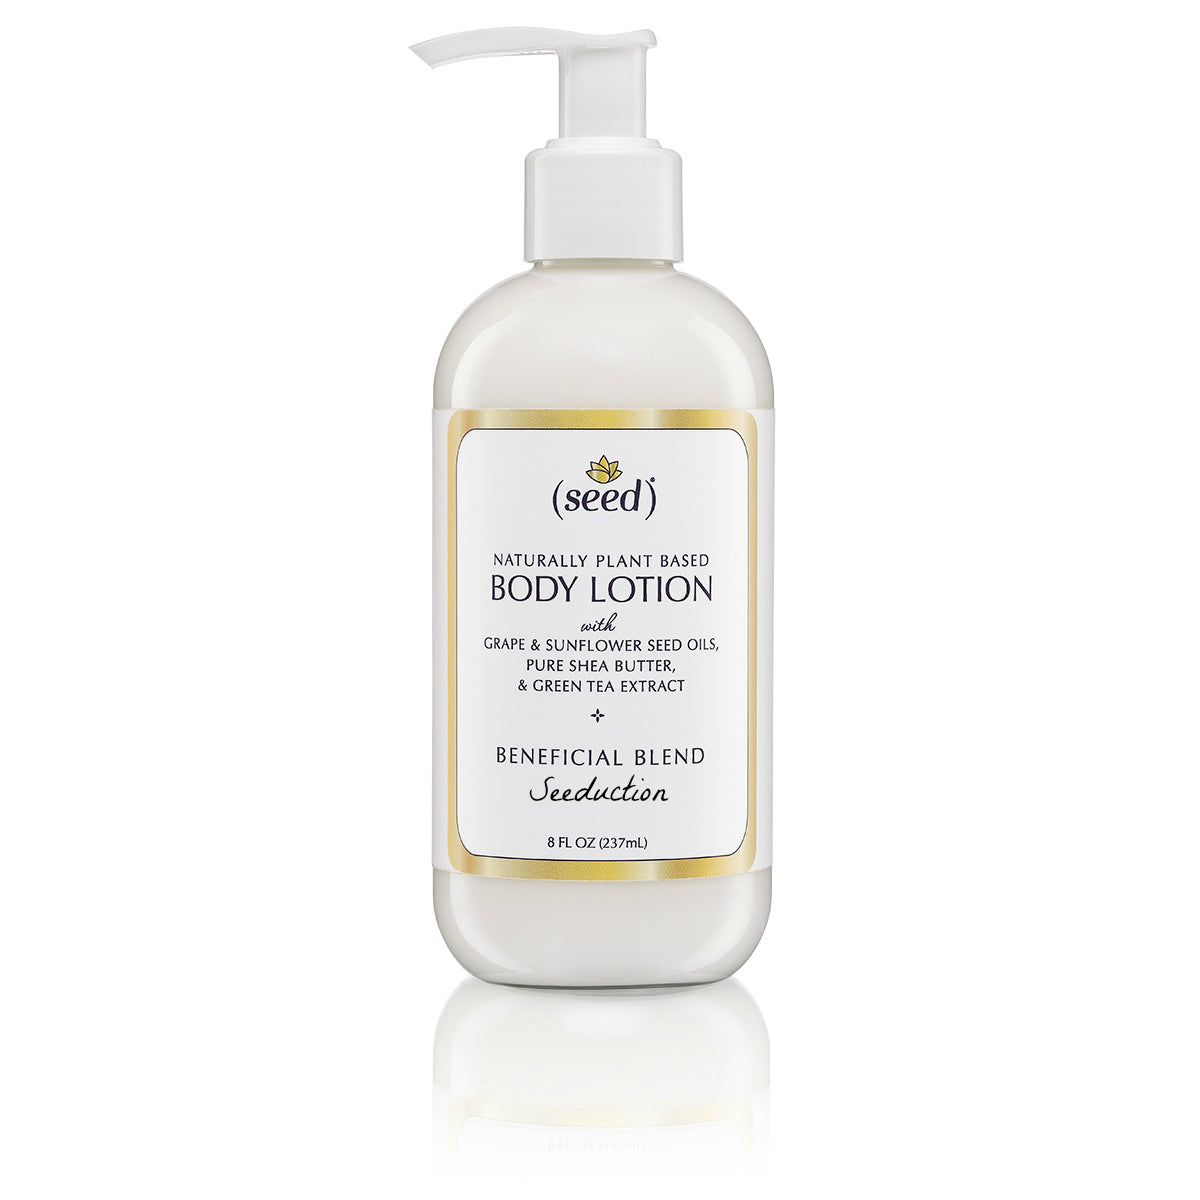 Seed Seeduction Blend Body Lotion features essential oils of ylang ylang, patchouli, and ginger